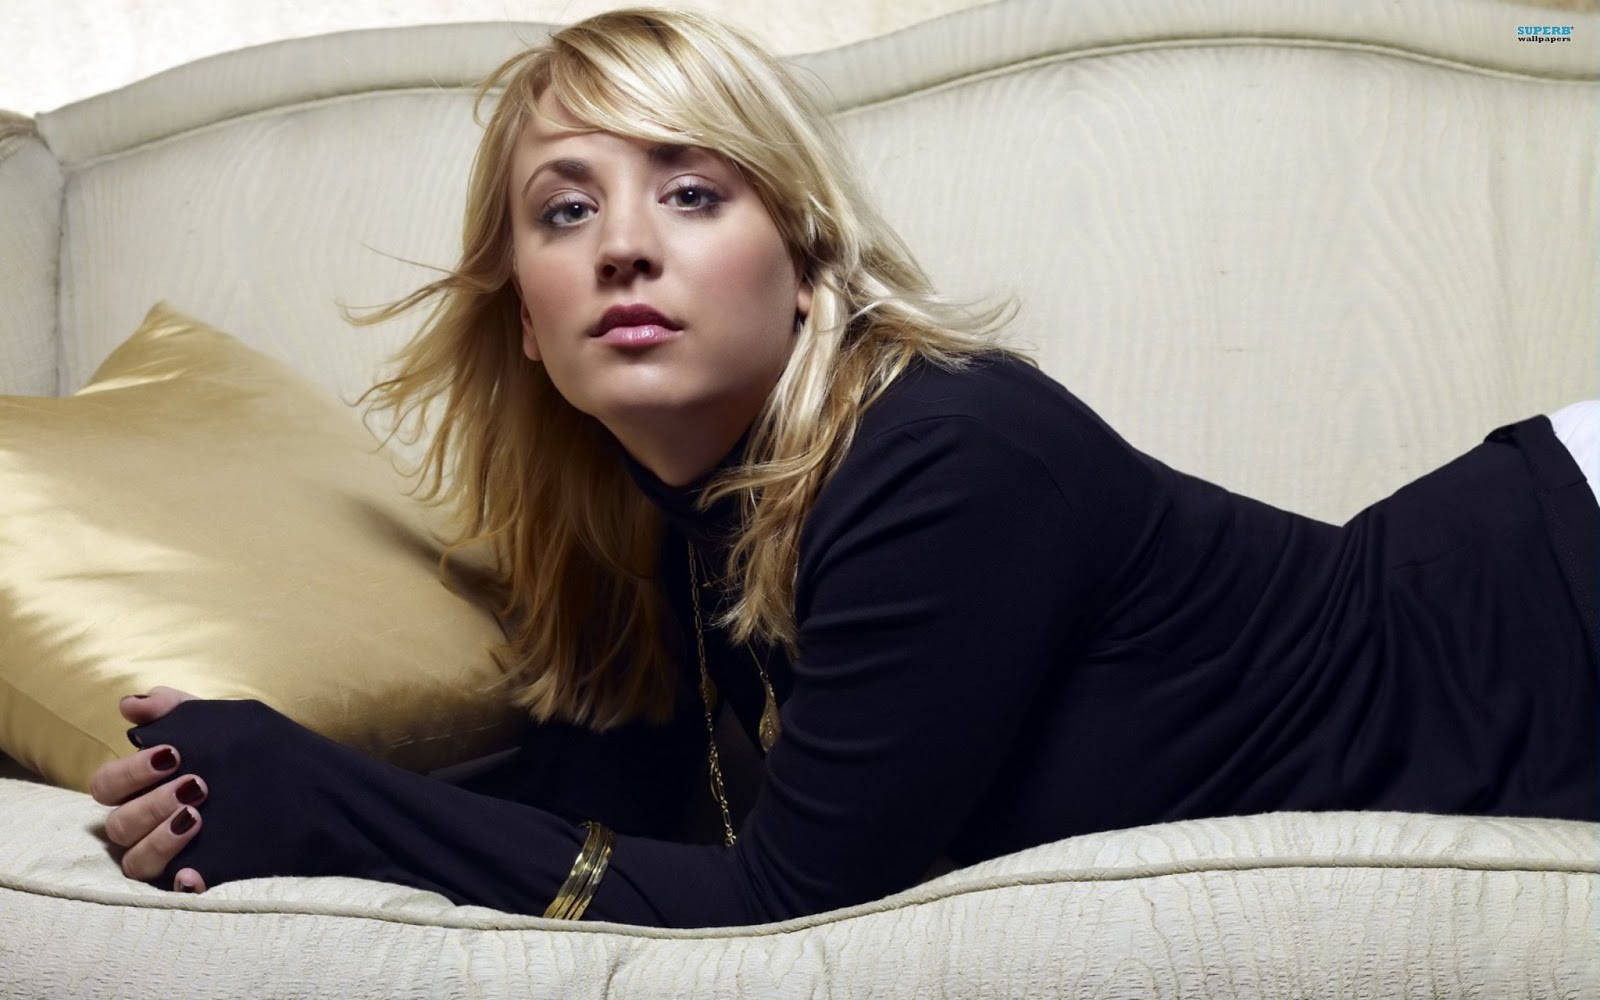 Blonde Kaley Cuoco On Couch Wallpaper